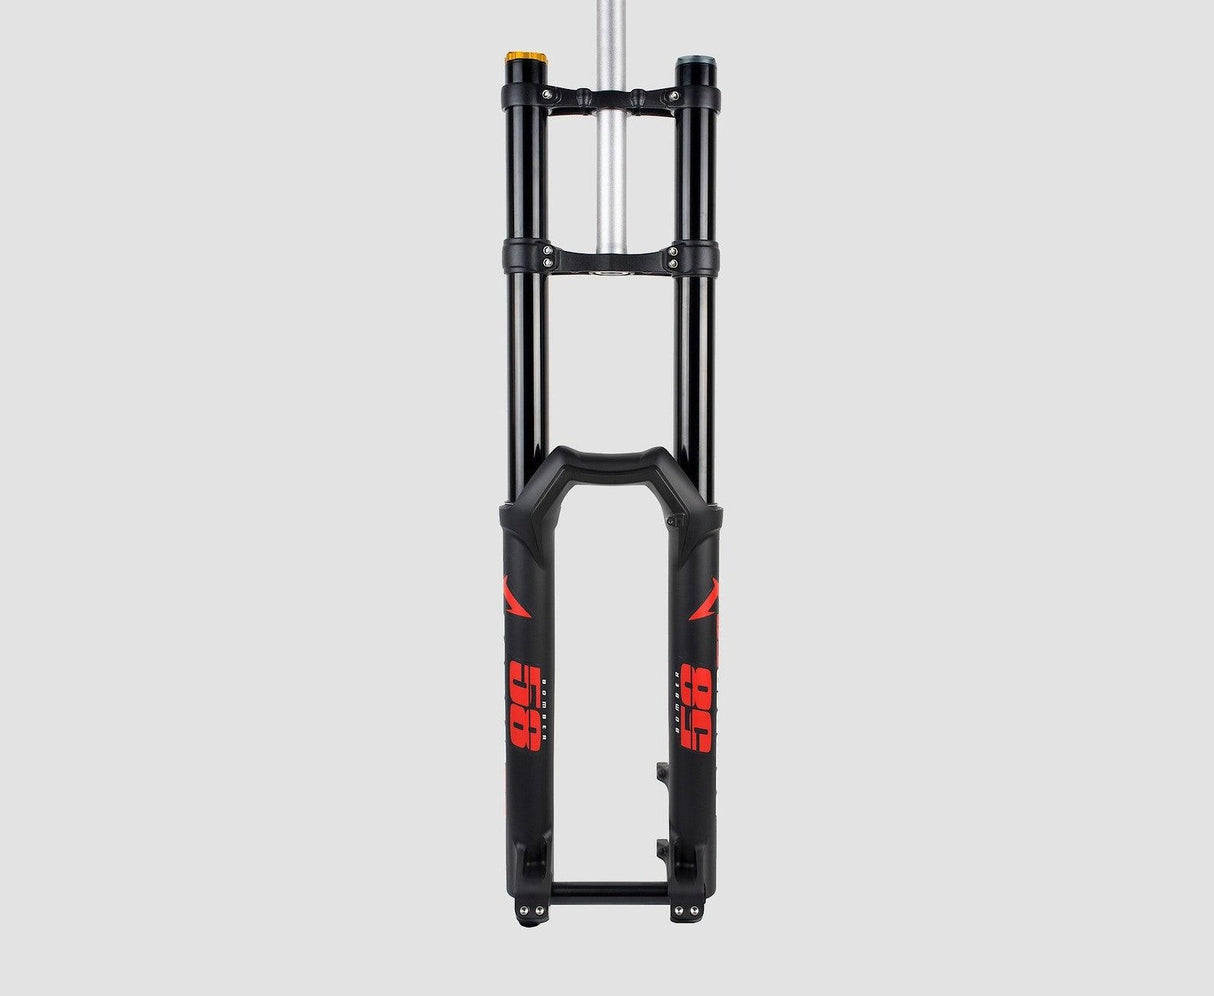 Marzocchi Bomber 58 GRIP FIT 1.125 Fork 27.5" / 203mm